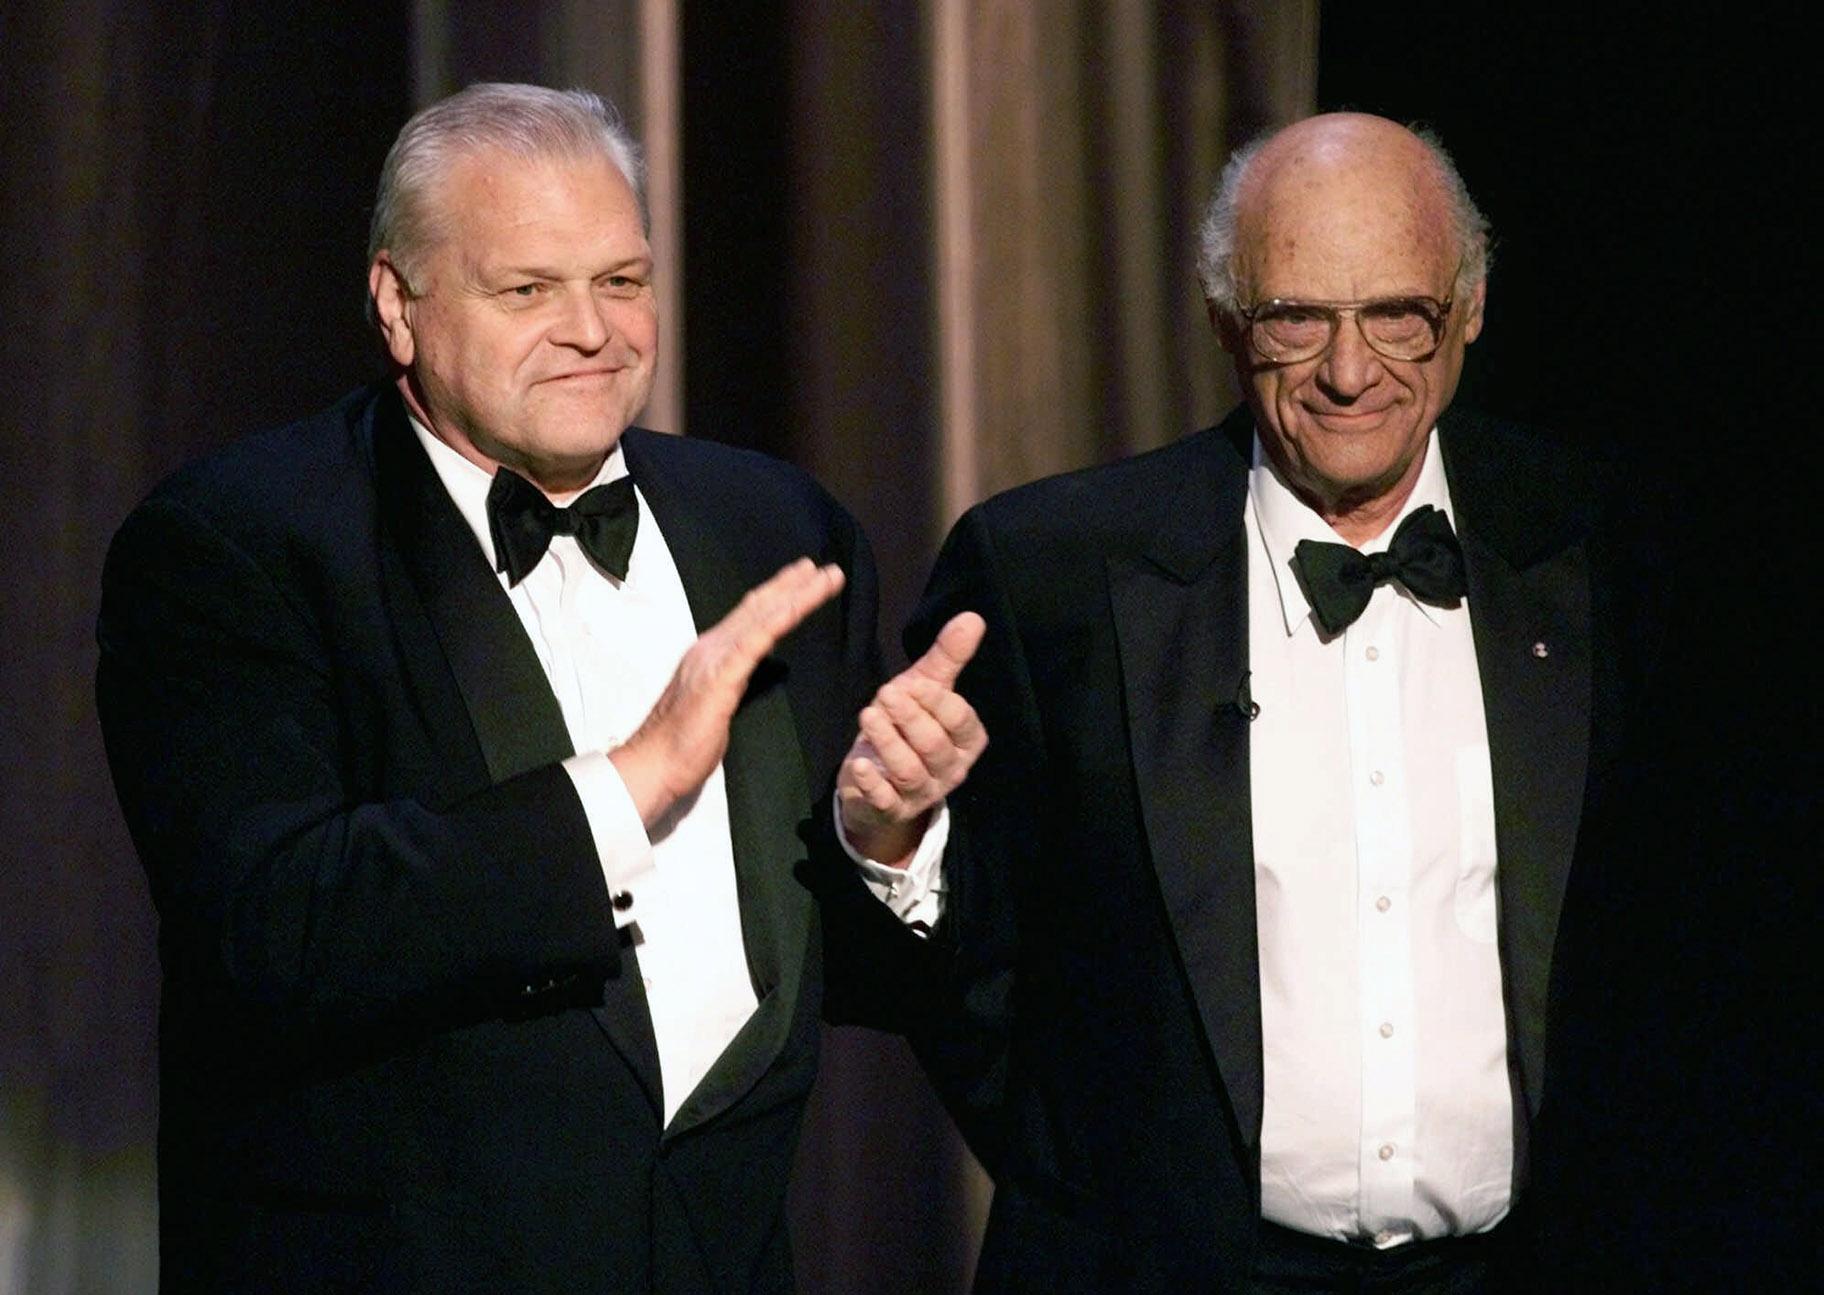 In this June 6, 1999 file photo, actor Brian Dennehy, left, applauds playwright, Arthur Miller, before awarding him the Lifetime Achievement Award at the Tony Awards in New York. (AP Photo / Kathy Willens, File)